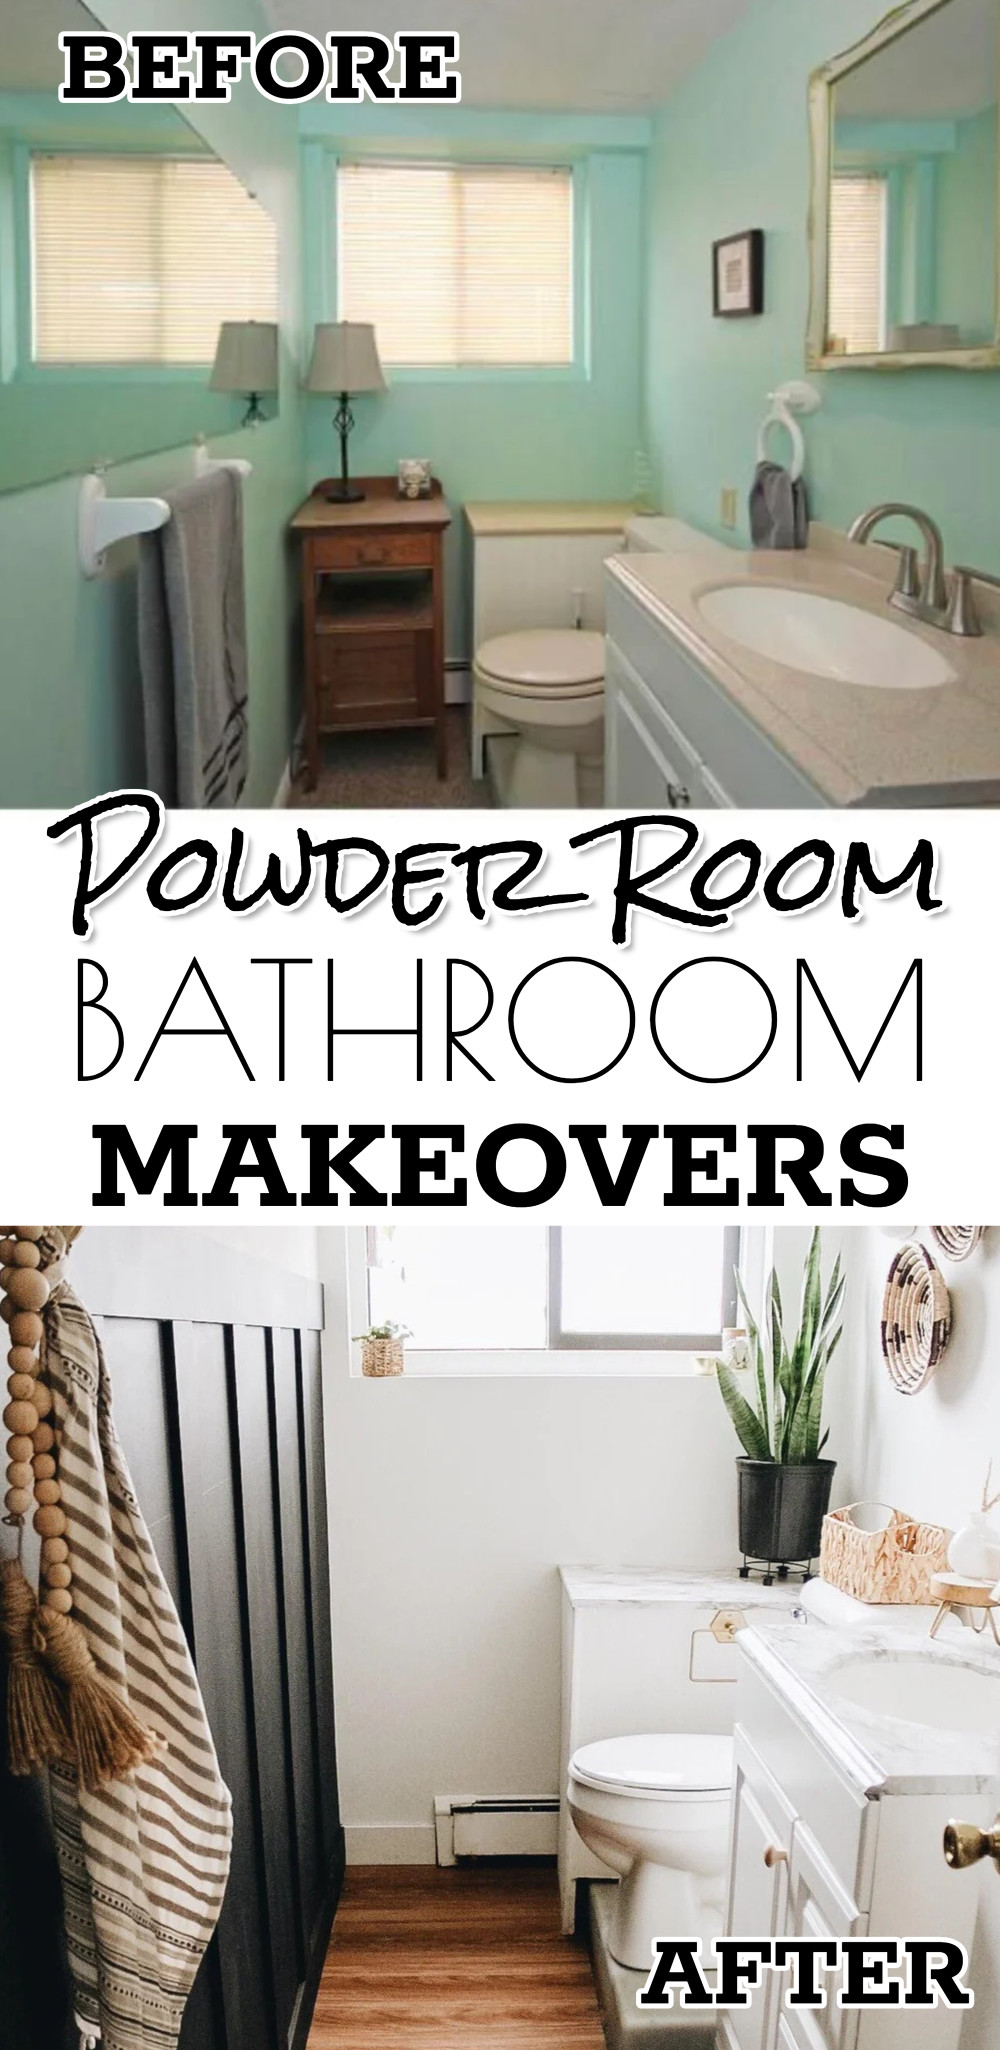 Powder Room Guest Bathroom Makeovers Before and After Budget-Friendly Upgrades